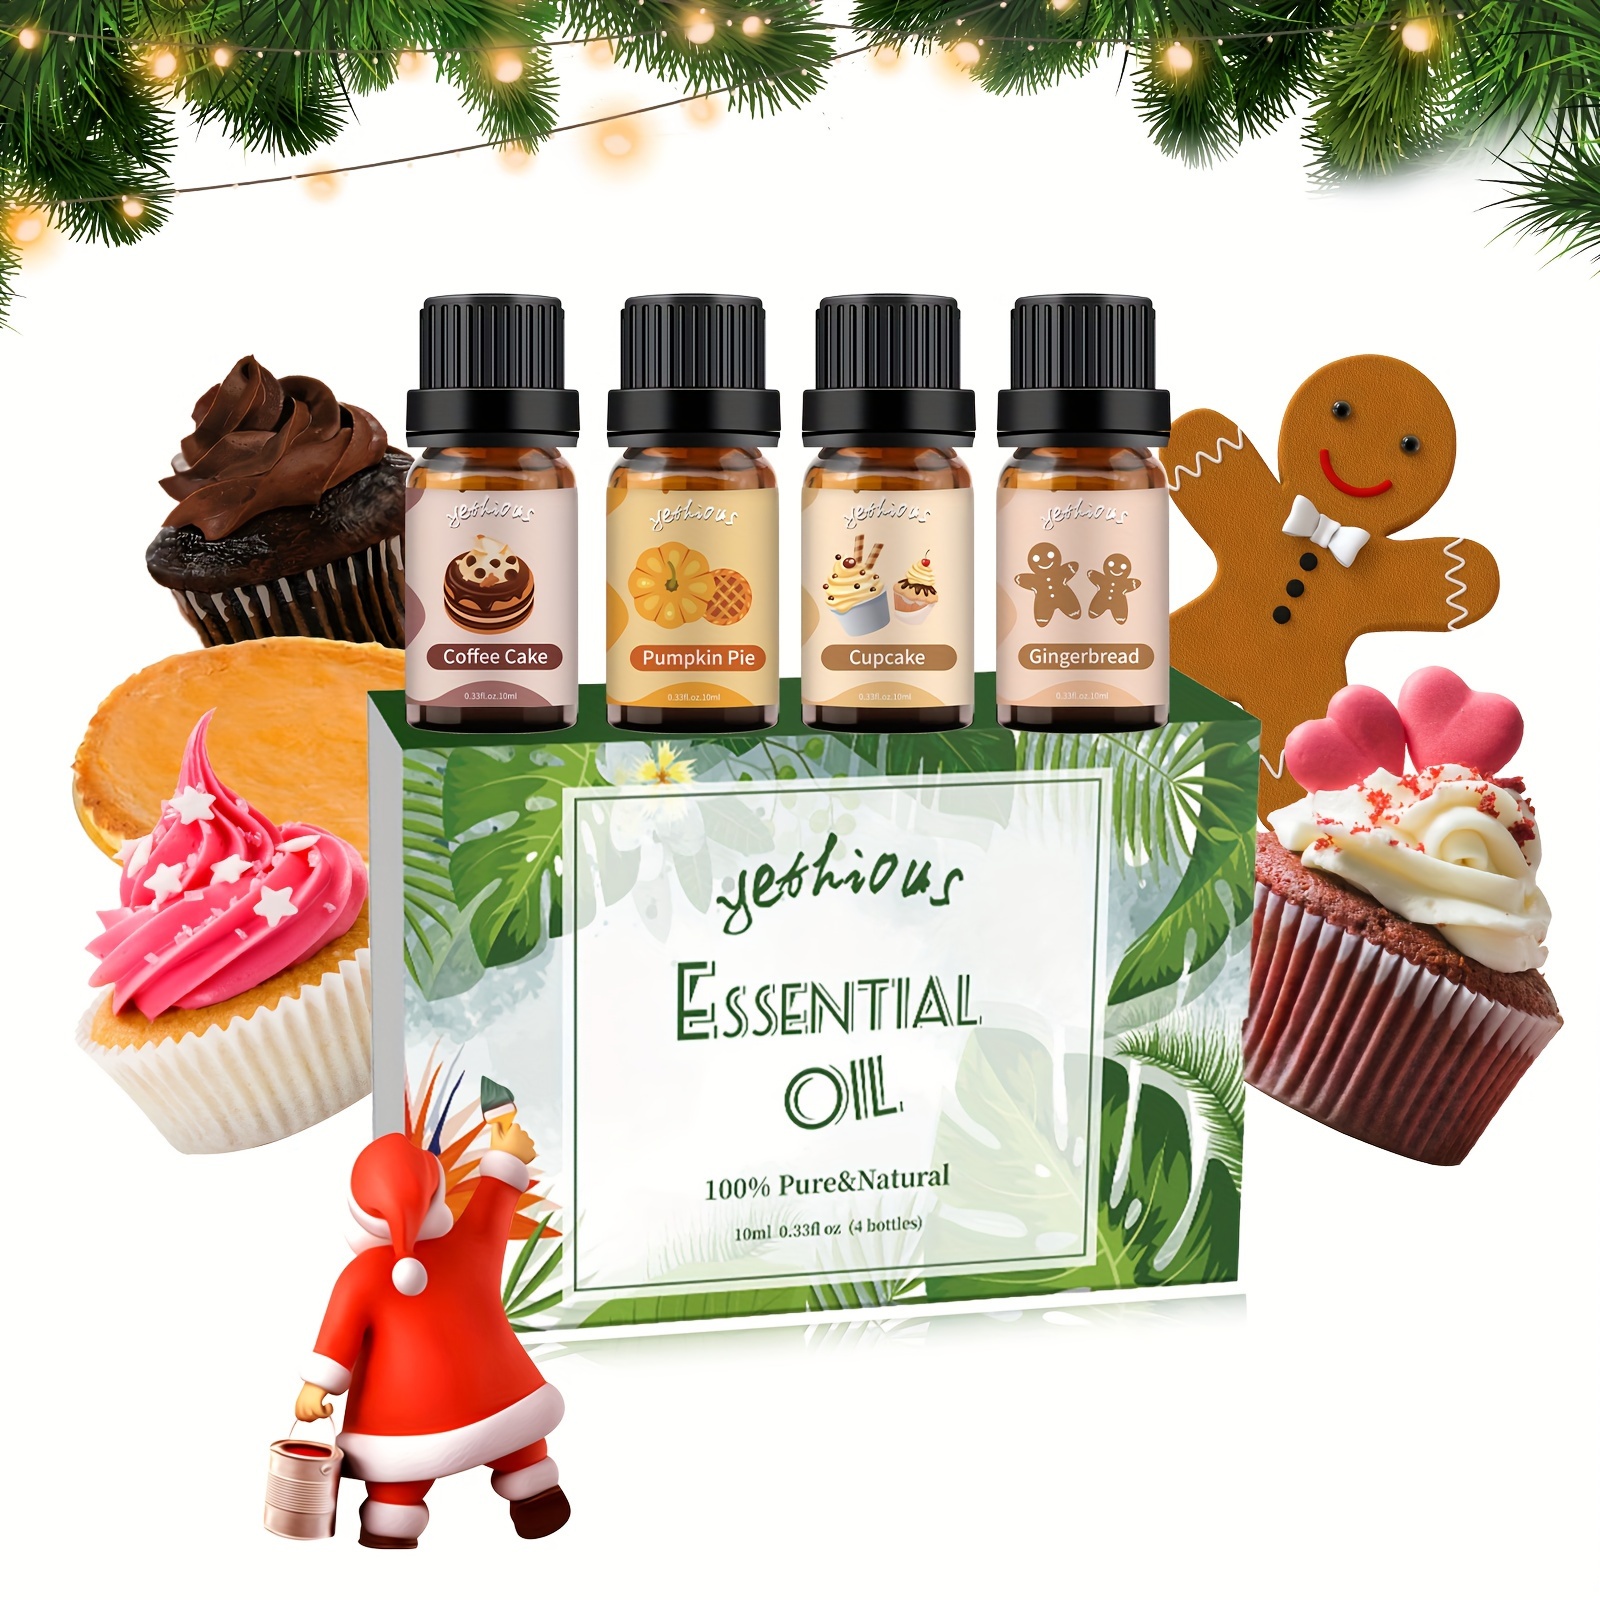  P&J Fragrance Oil Bakery Set  Pumpkin Pie, Cupcake, Sugar  Cookies, Coffee Cake, Snickerdoodle, and Gingerbread Candle Scents for Candle  Making, Freshie Scents, Soap Making Supplies : Books